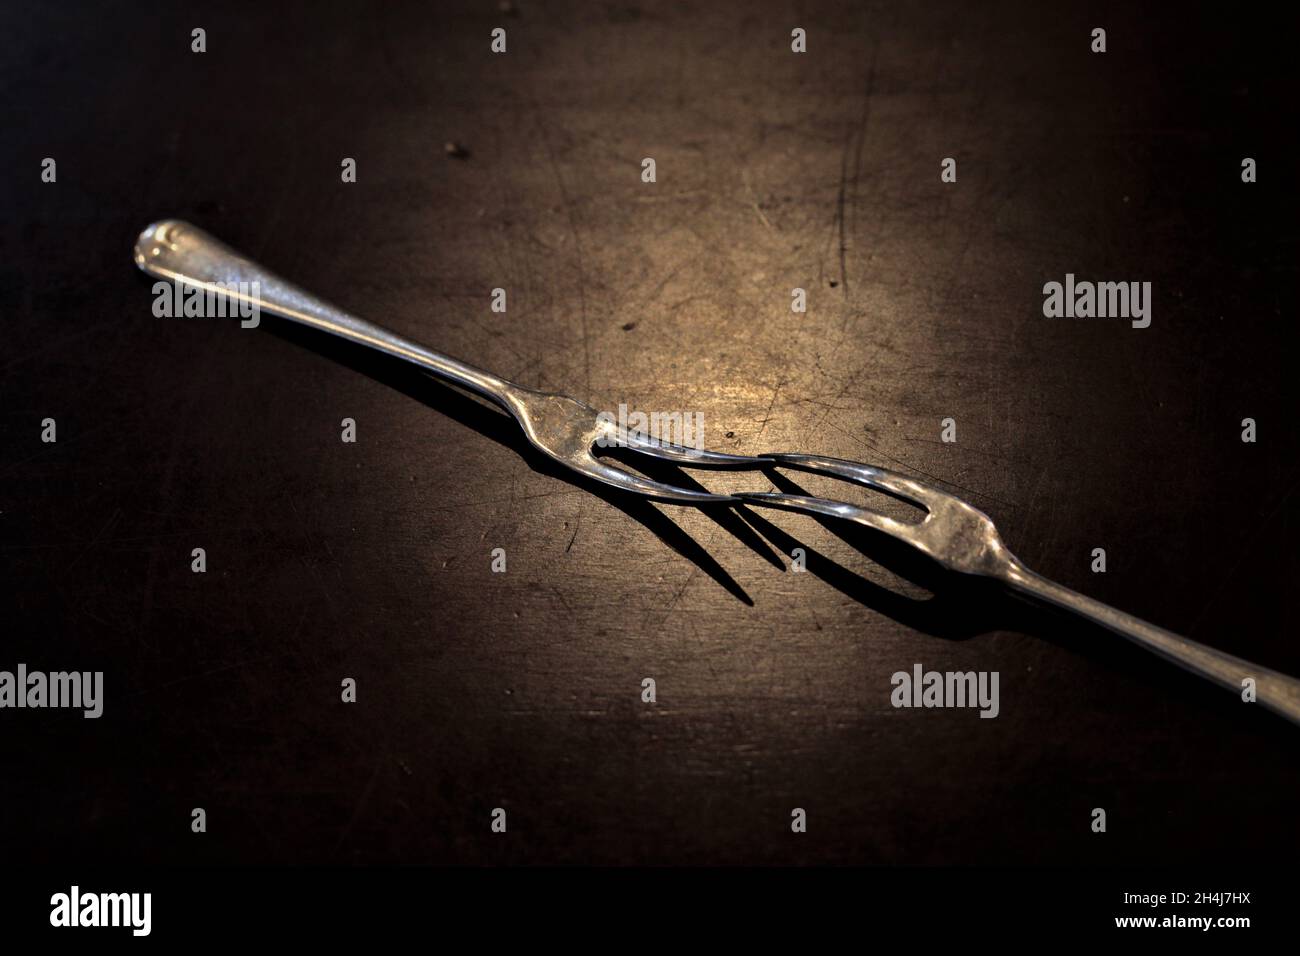 Two forks touching at tines under spotlight. Stock Photo